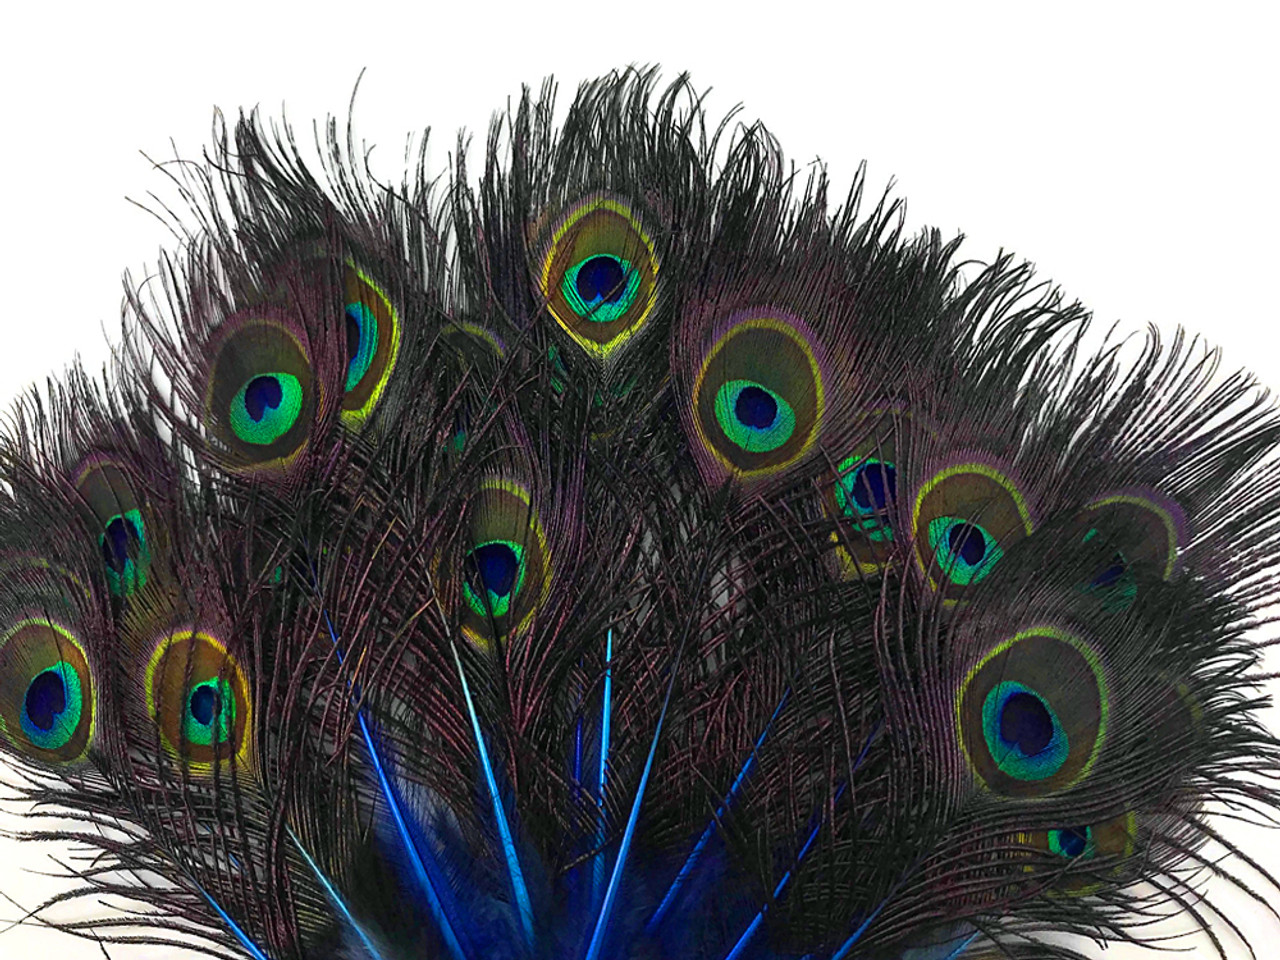 50 Pieces - Royal Blue Mini Natural Peacock Tail Body With Eyes Wholesale  Feathers (Bulk)